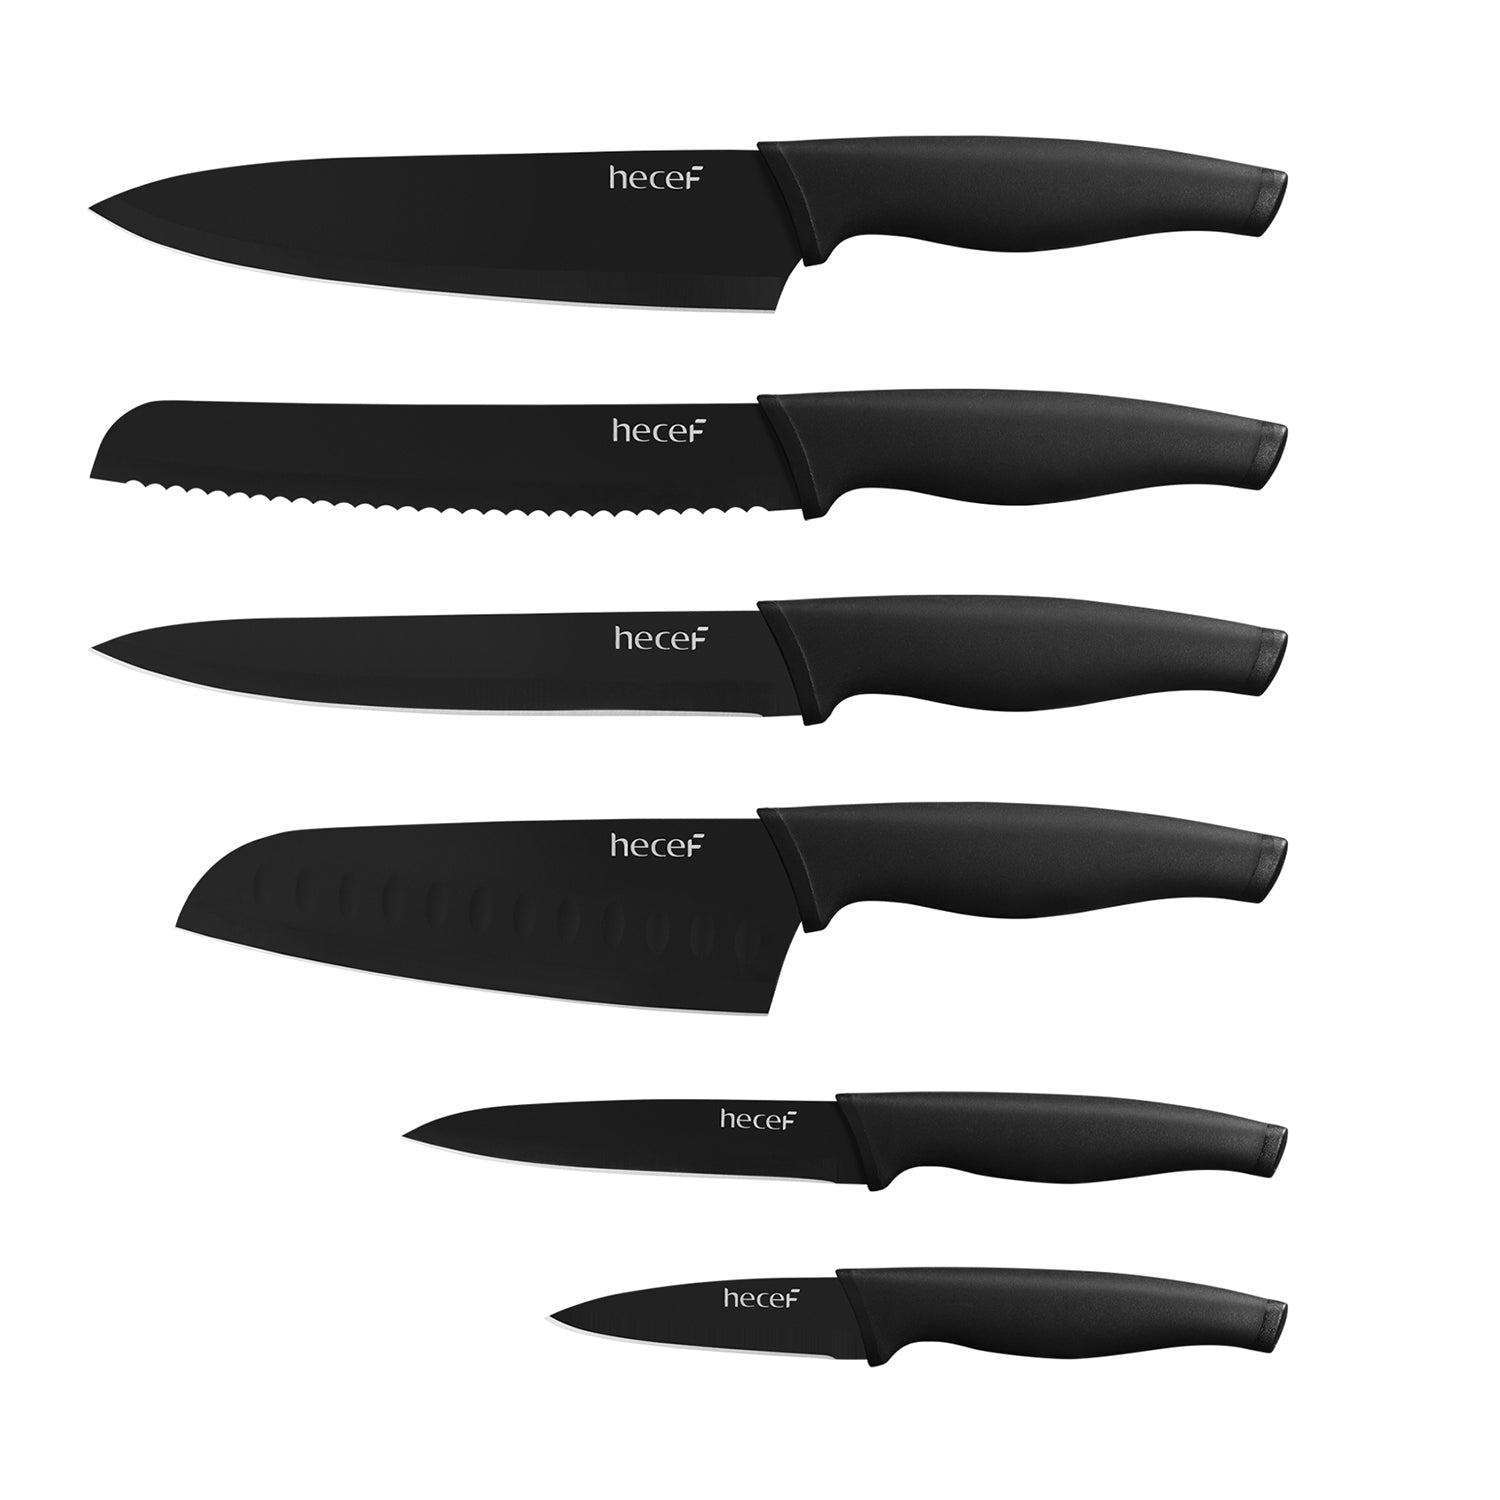 Hecef Black Oxide Knife Set of 6 with Matching Blade Protective